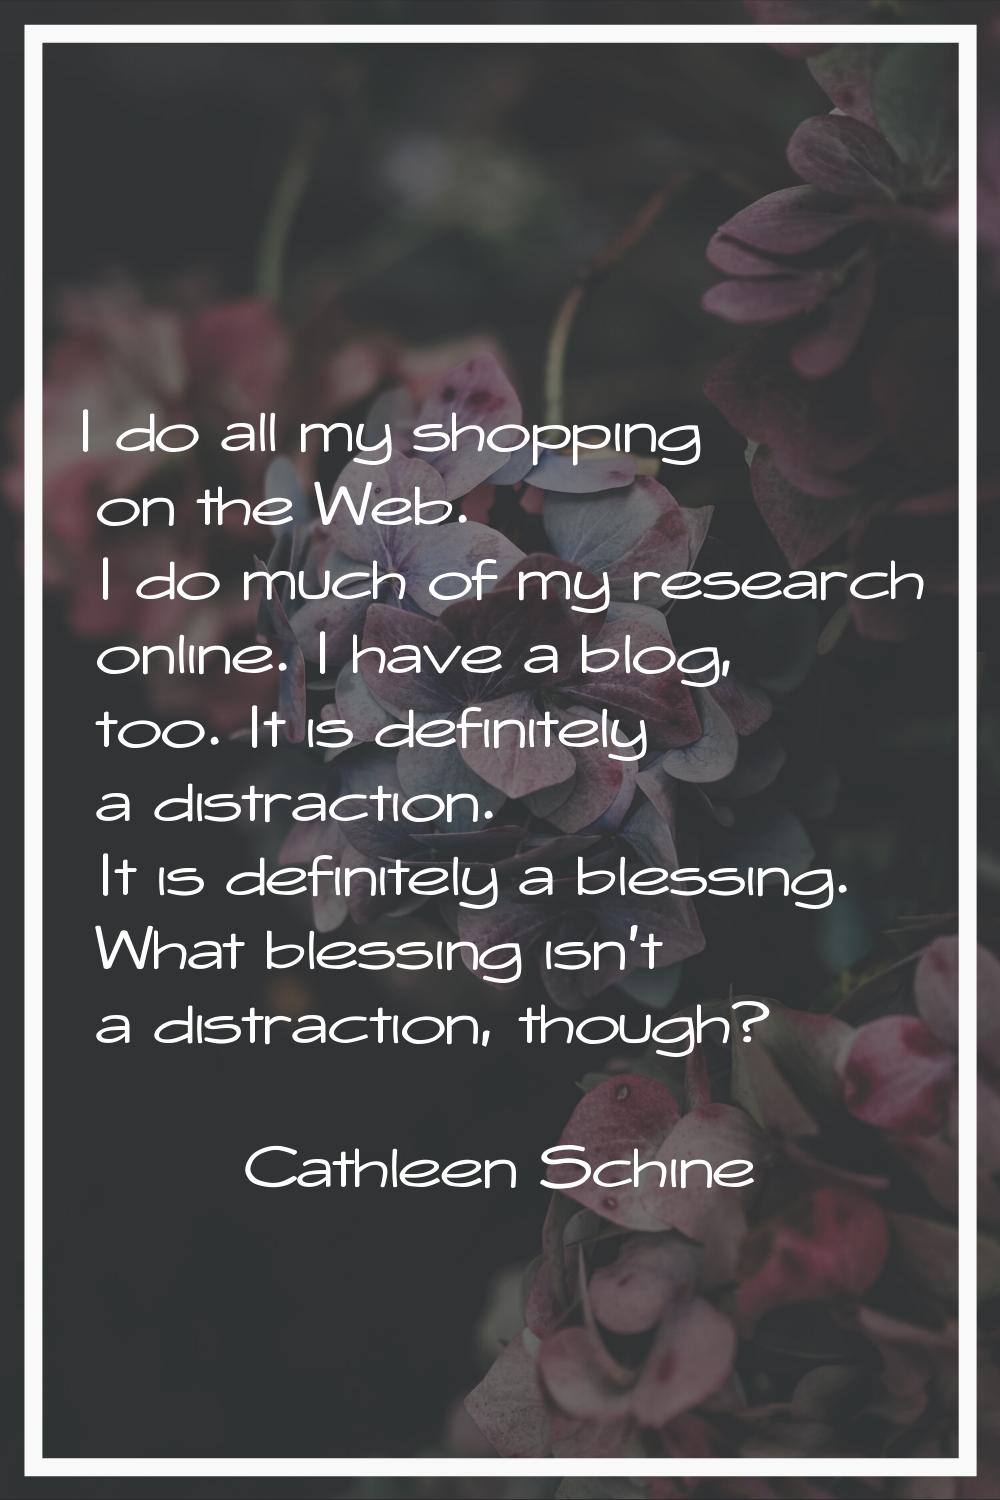 I do all my shopping on the Web. I do much of my research online. I have a blog, too. It is definit